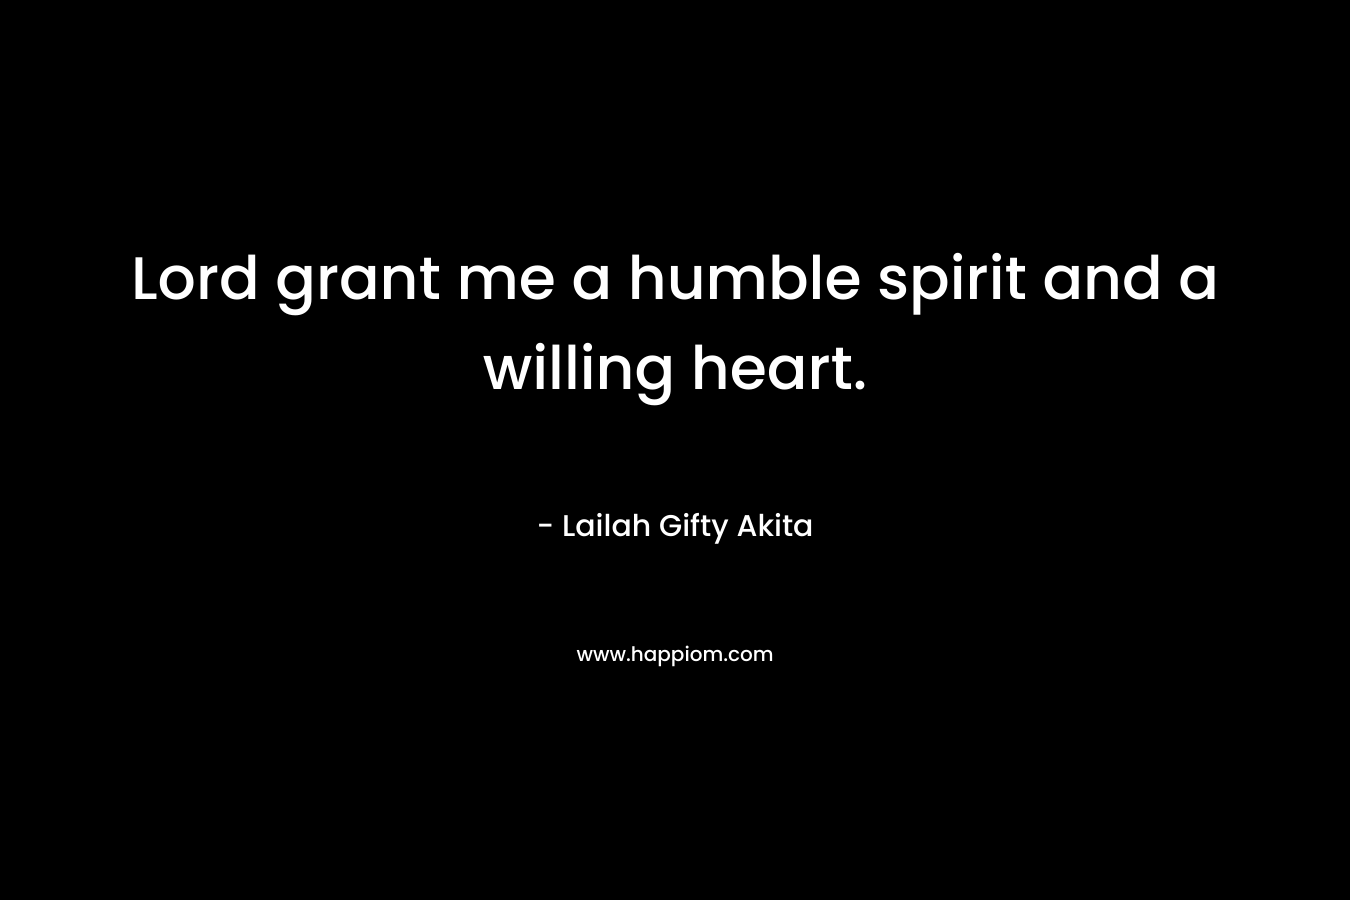 Lord grant me a humble spirit and a willing heart.